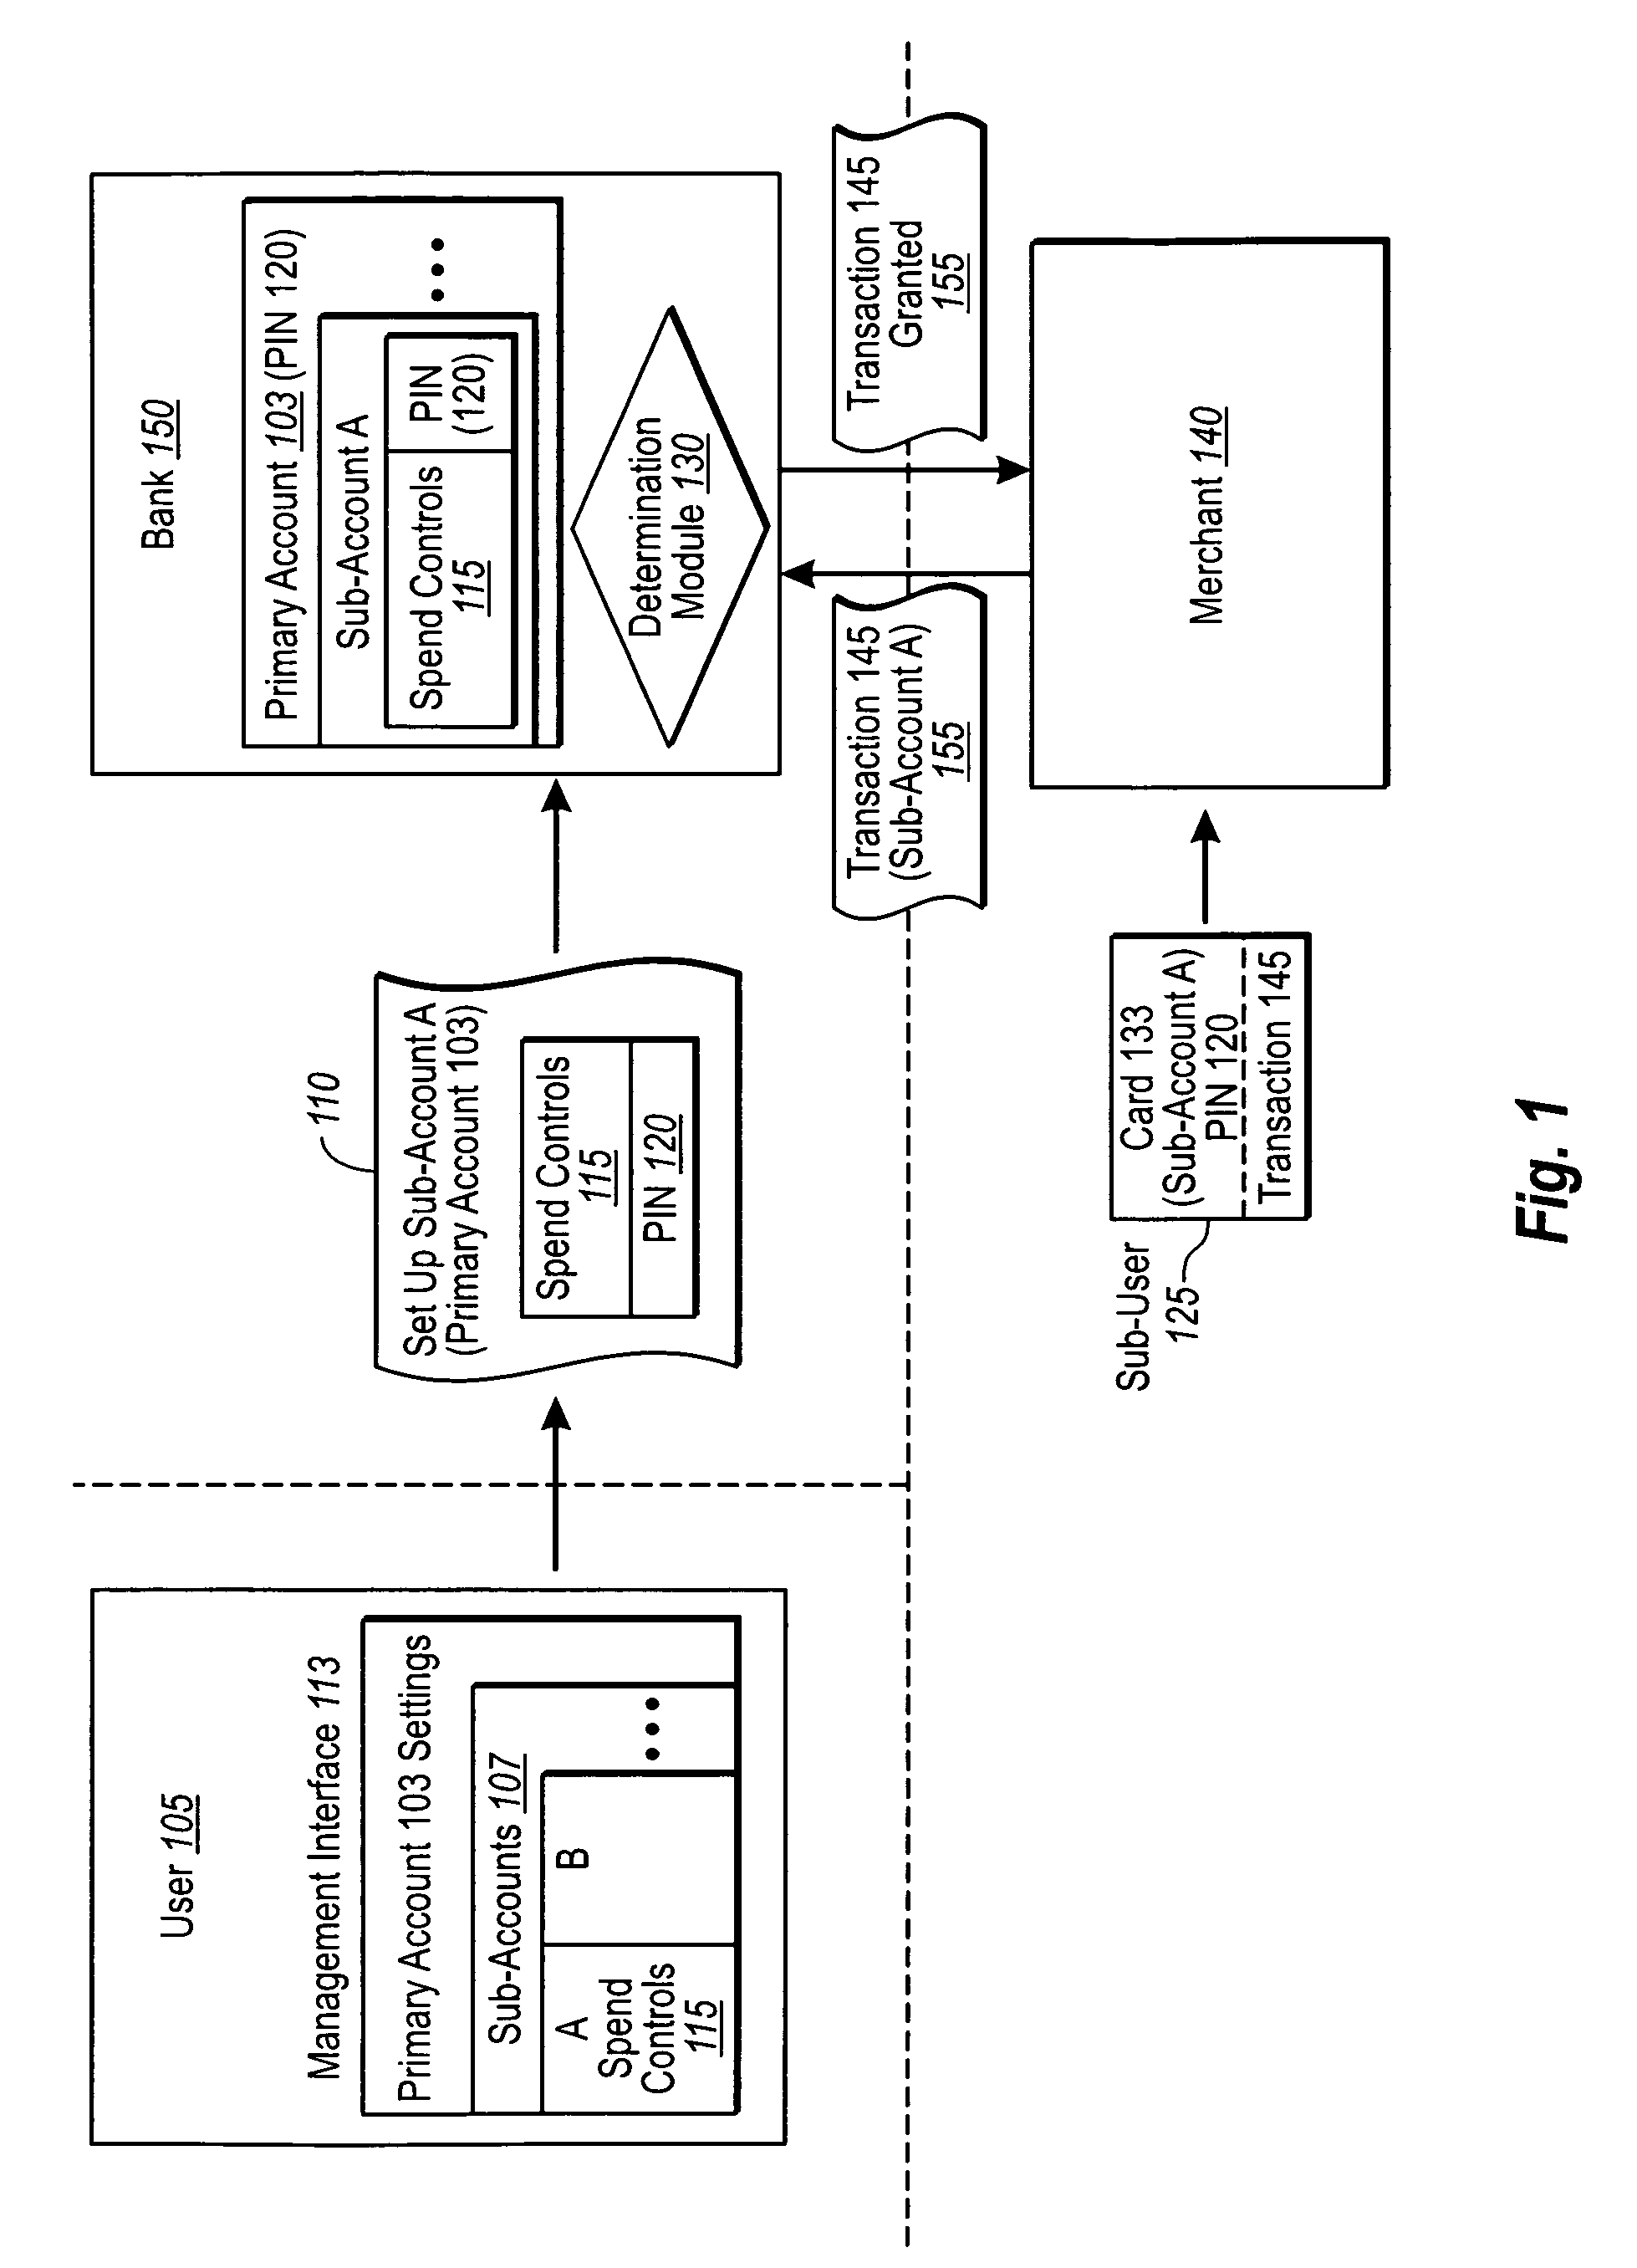 Electronic payment system with PIN and sub-account configurations